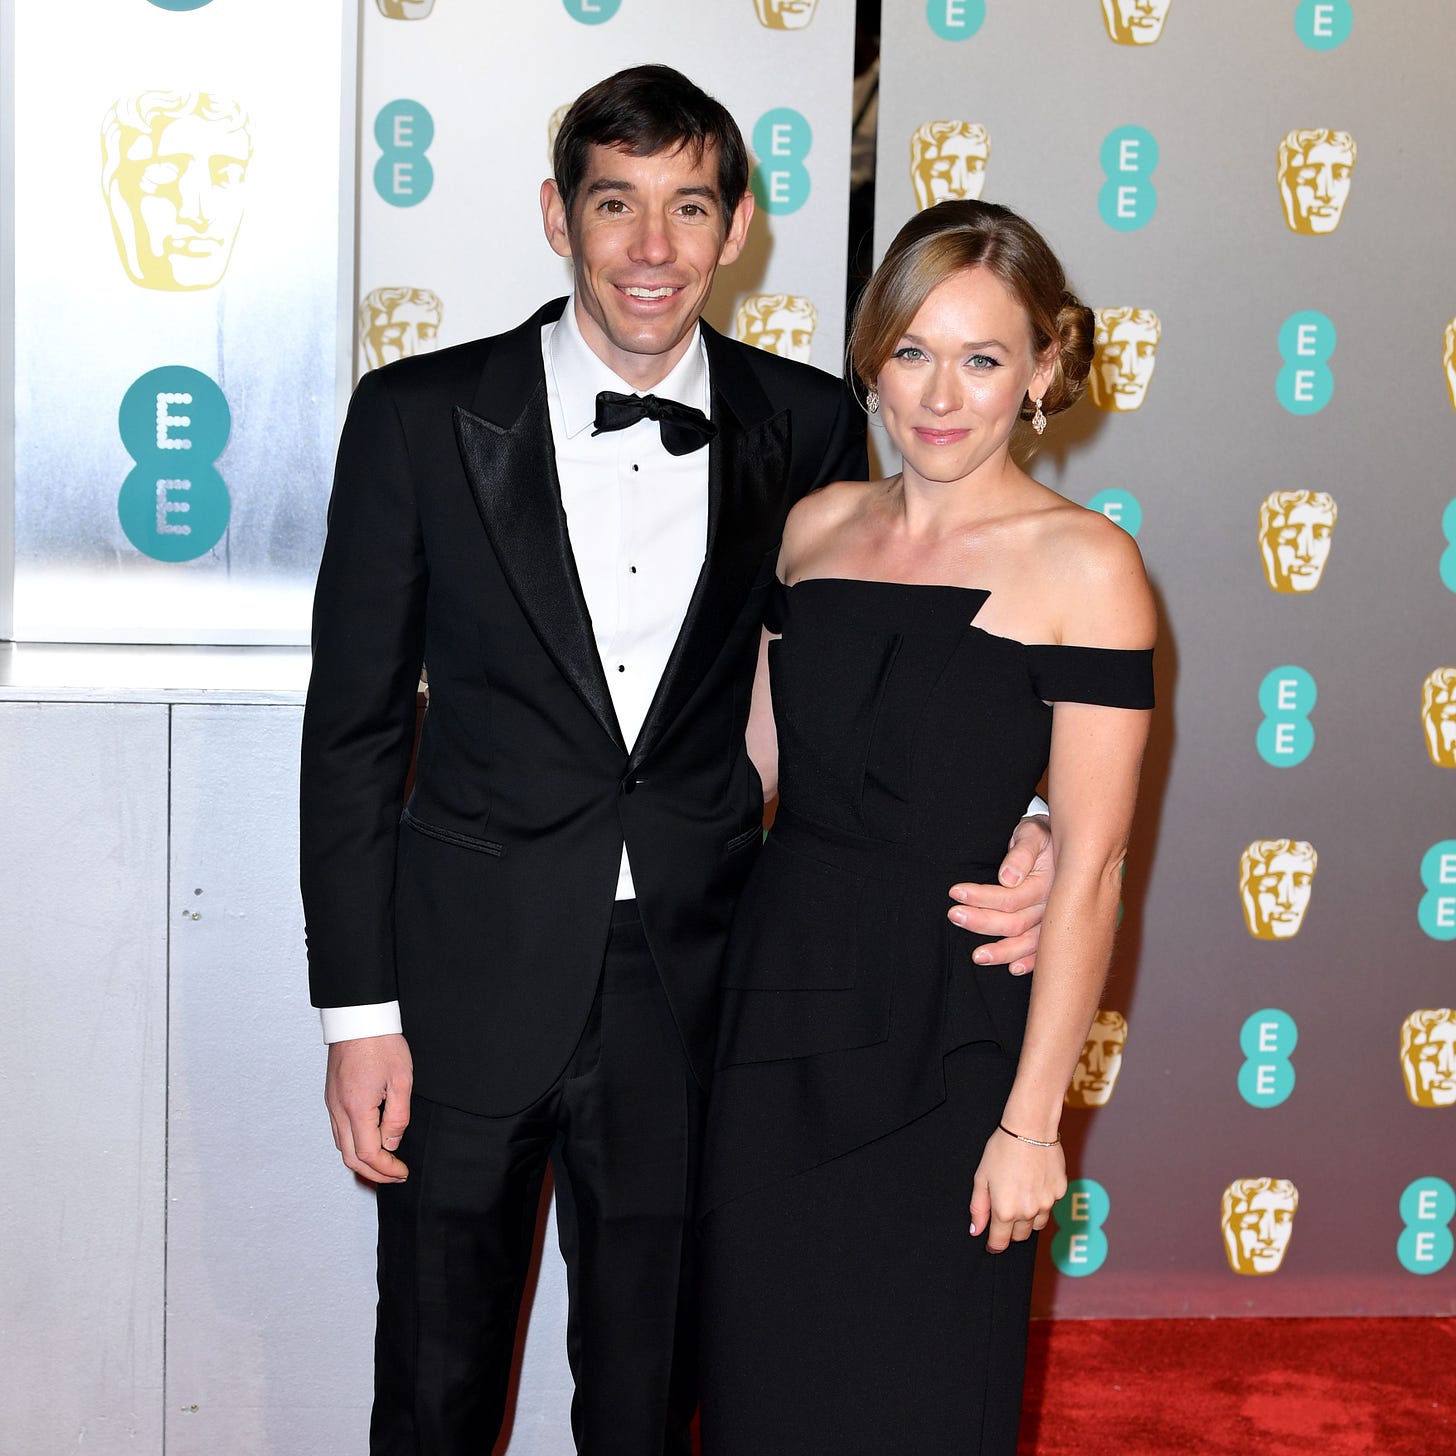 Rock Climber Alex Honnold Is Engaged To Sanni McCandless